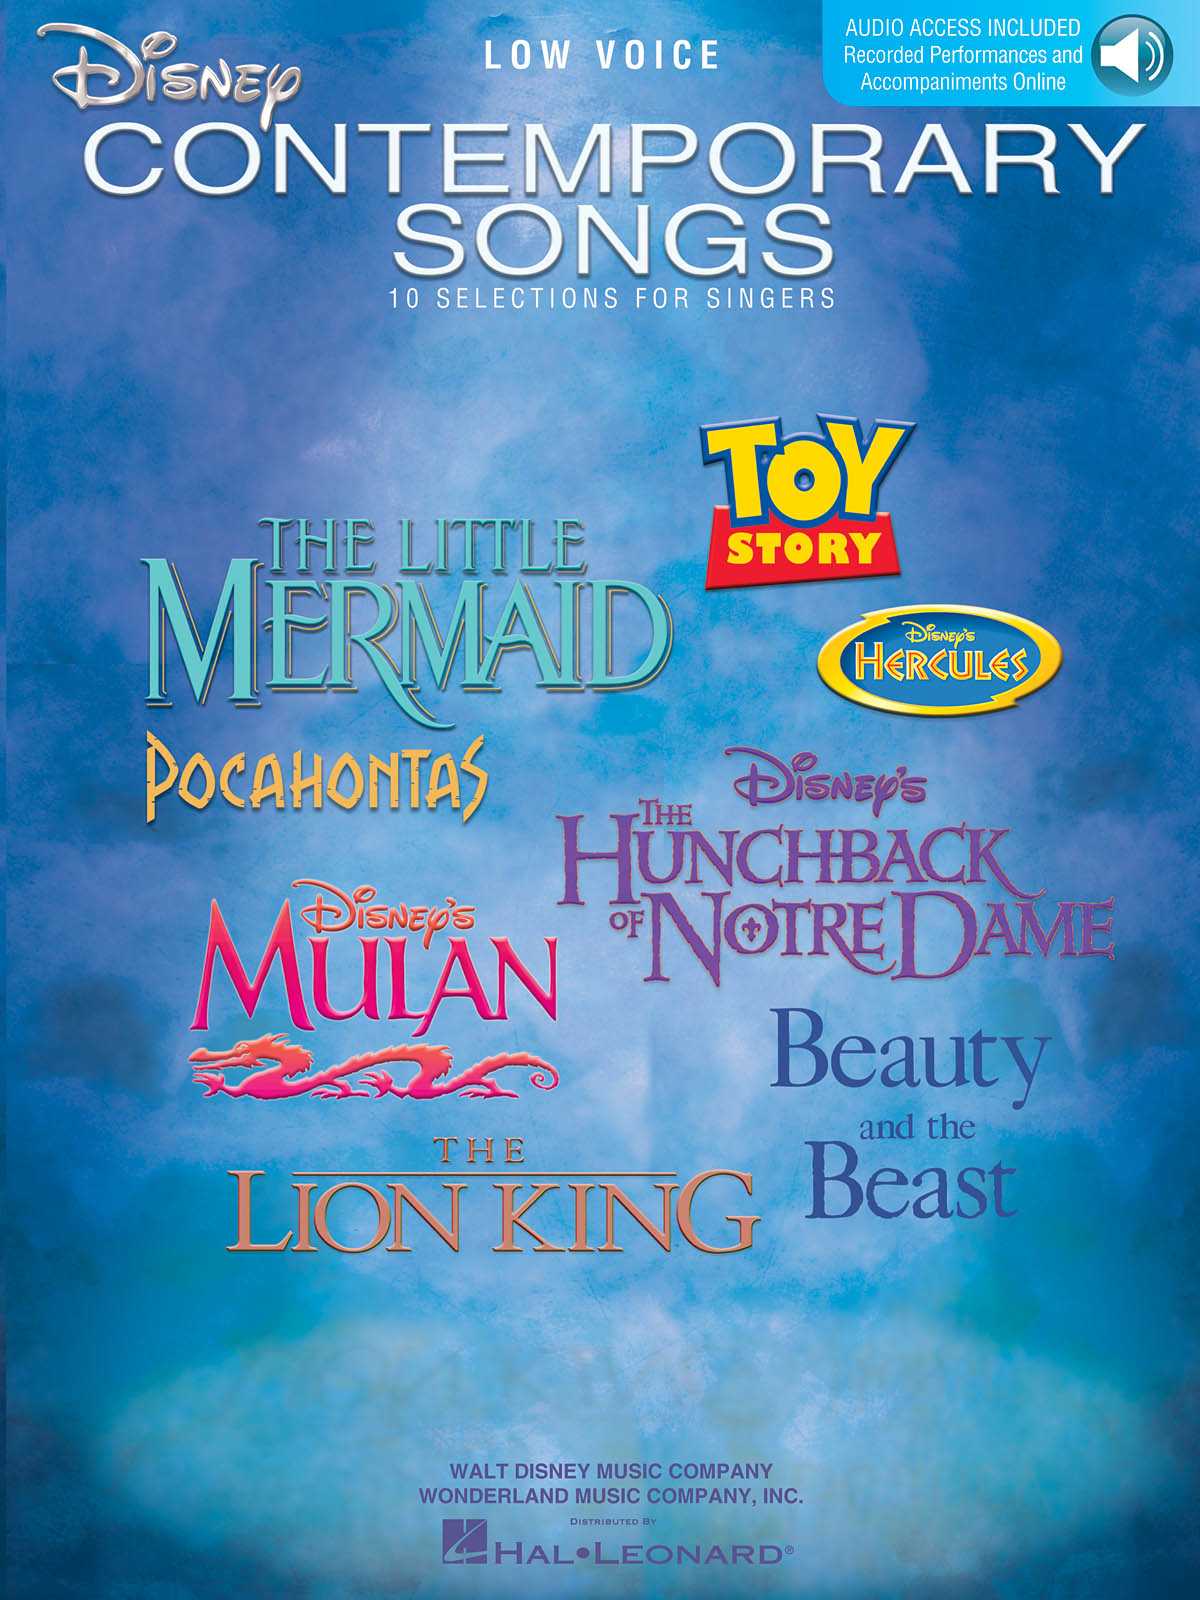 Disney Contemporary Songs 10 Selections for Singers - Low Voices